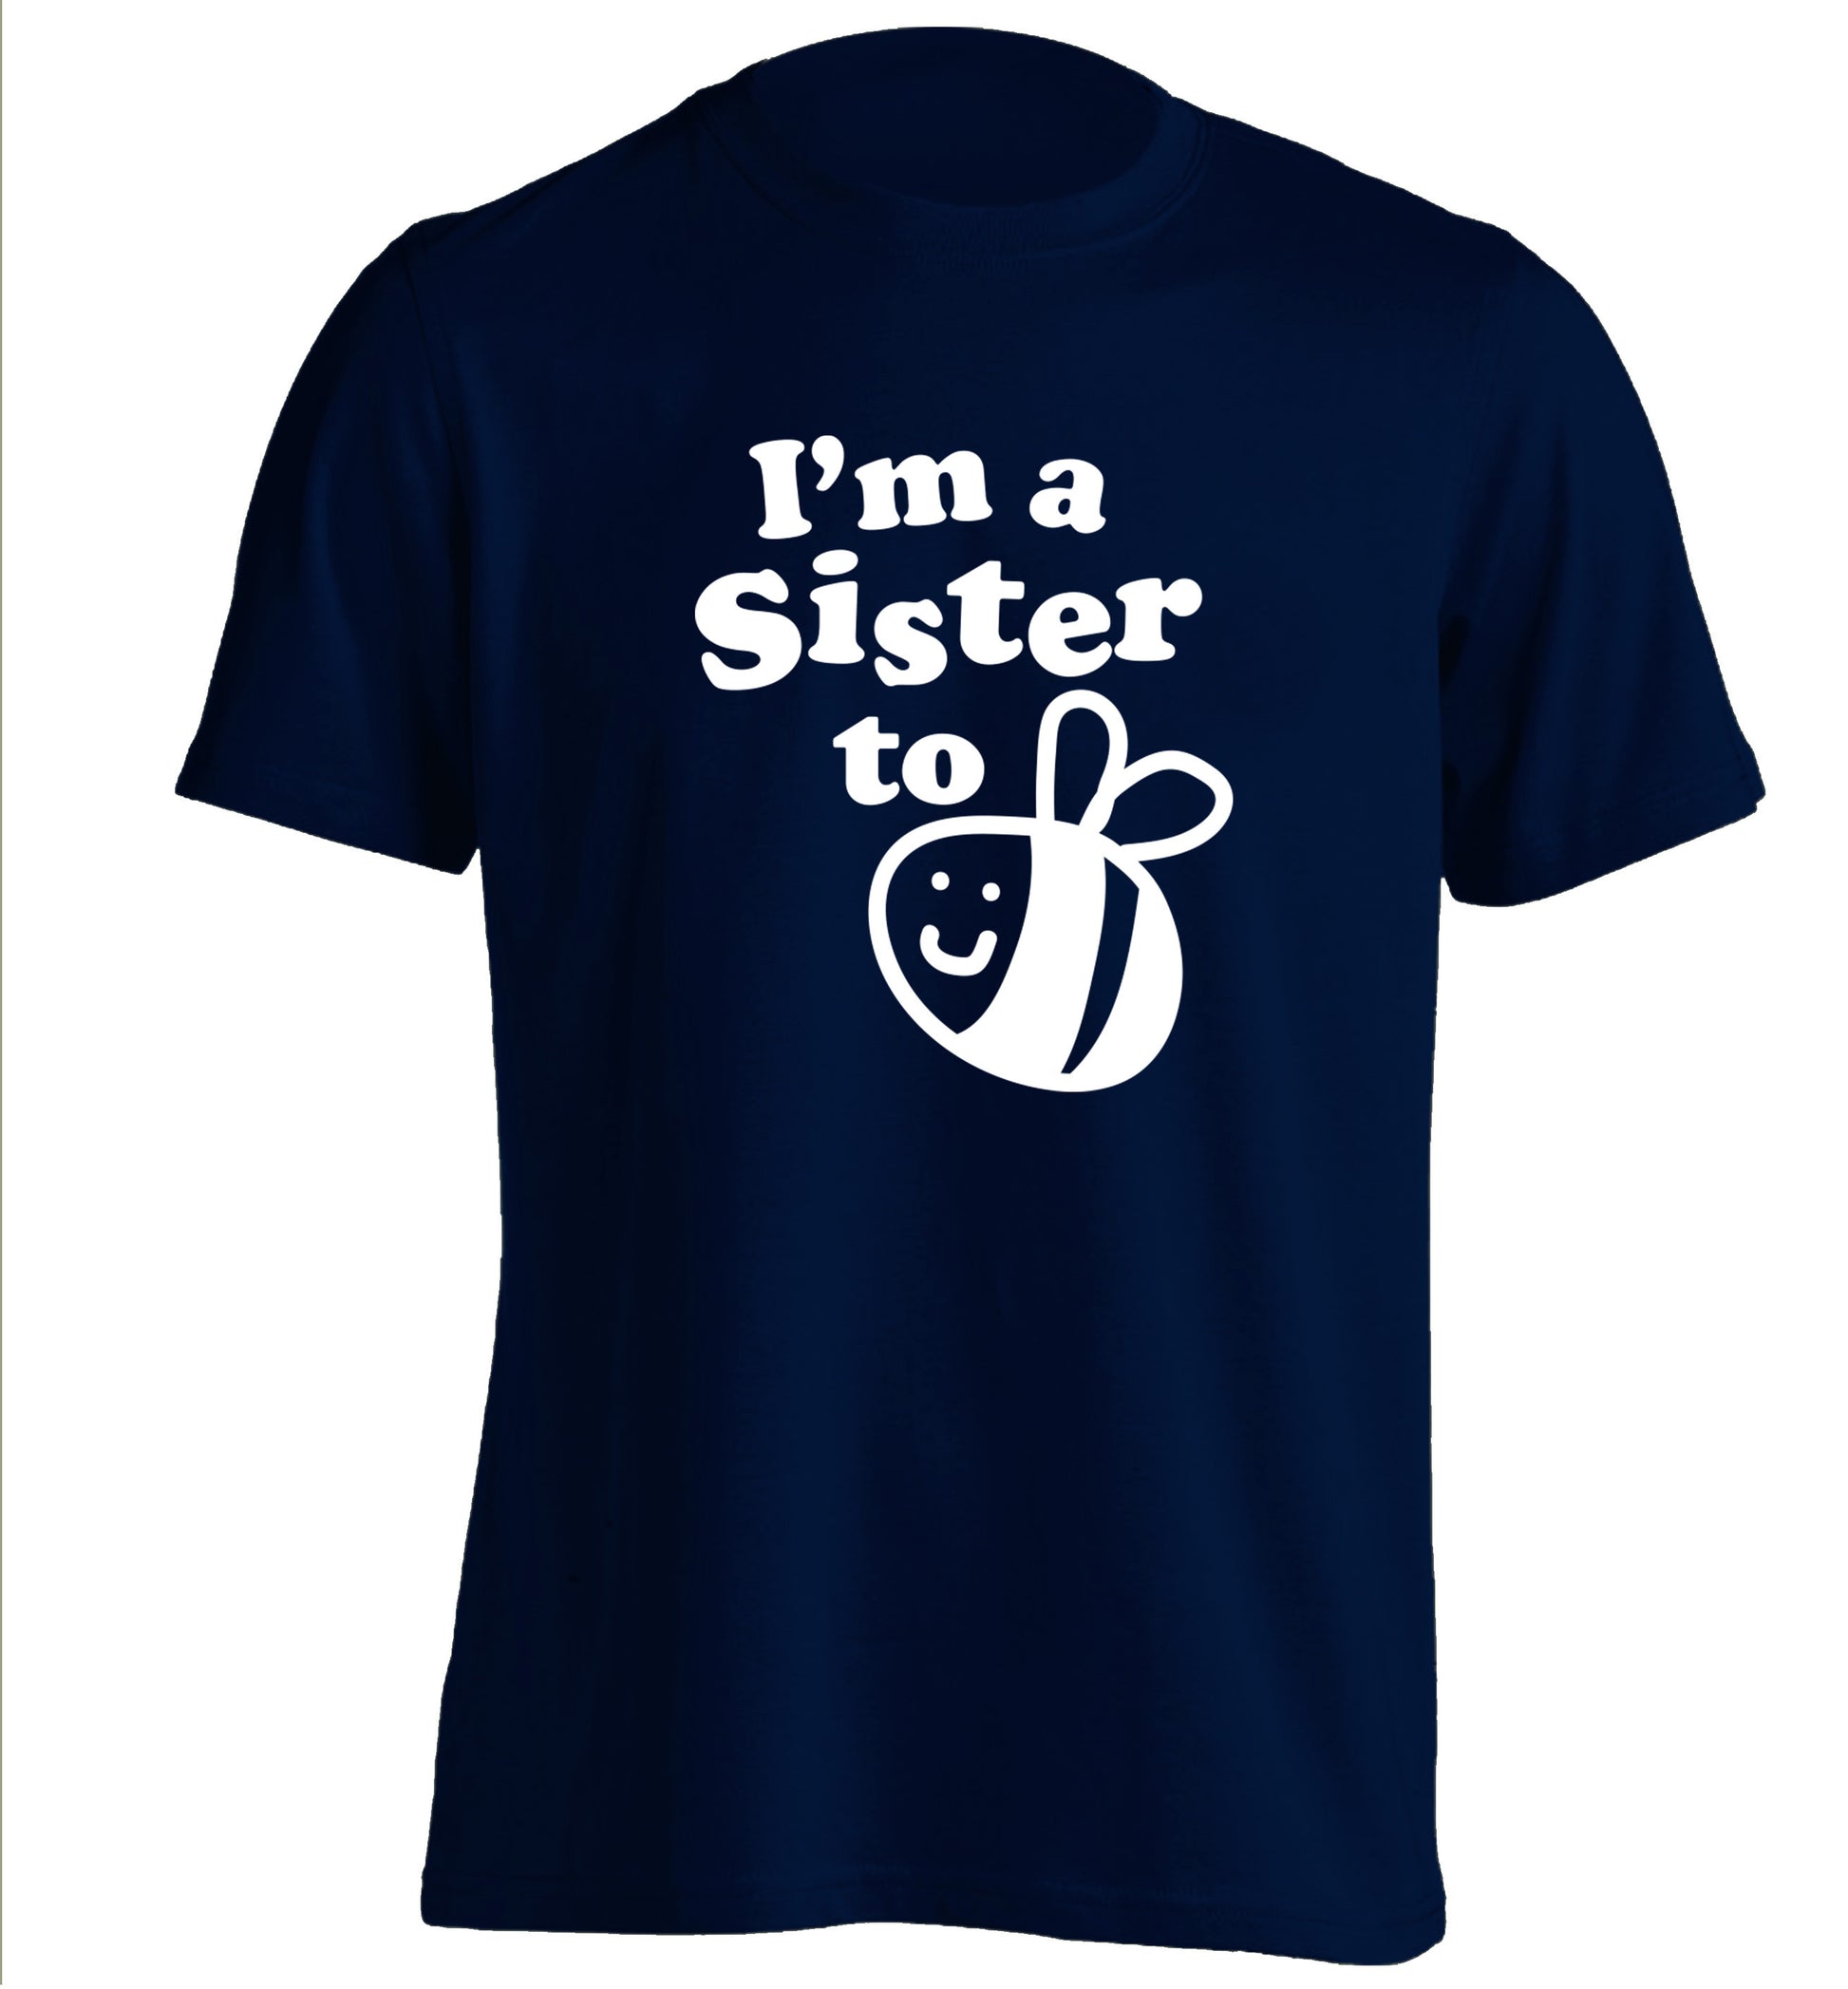 I'm a sister to be adults unisex navy Tshirt 2XL